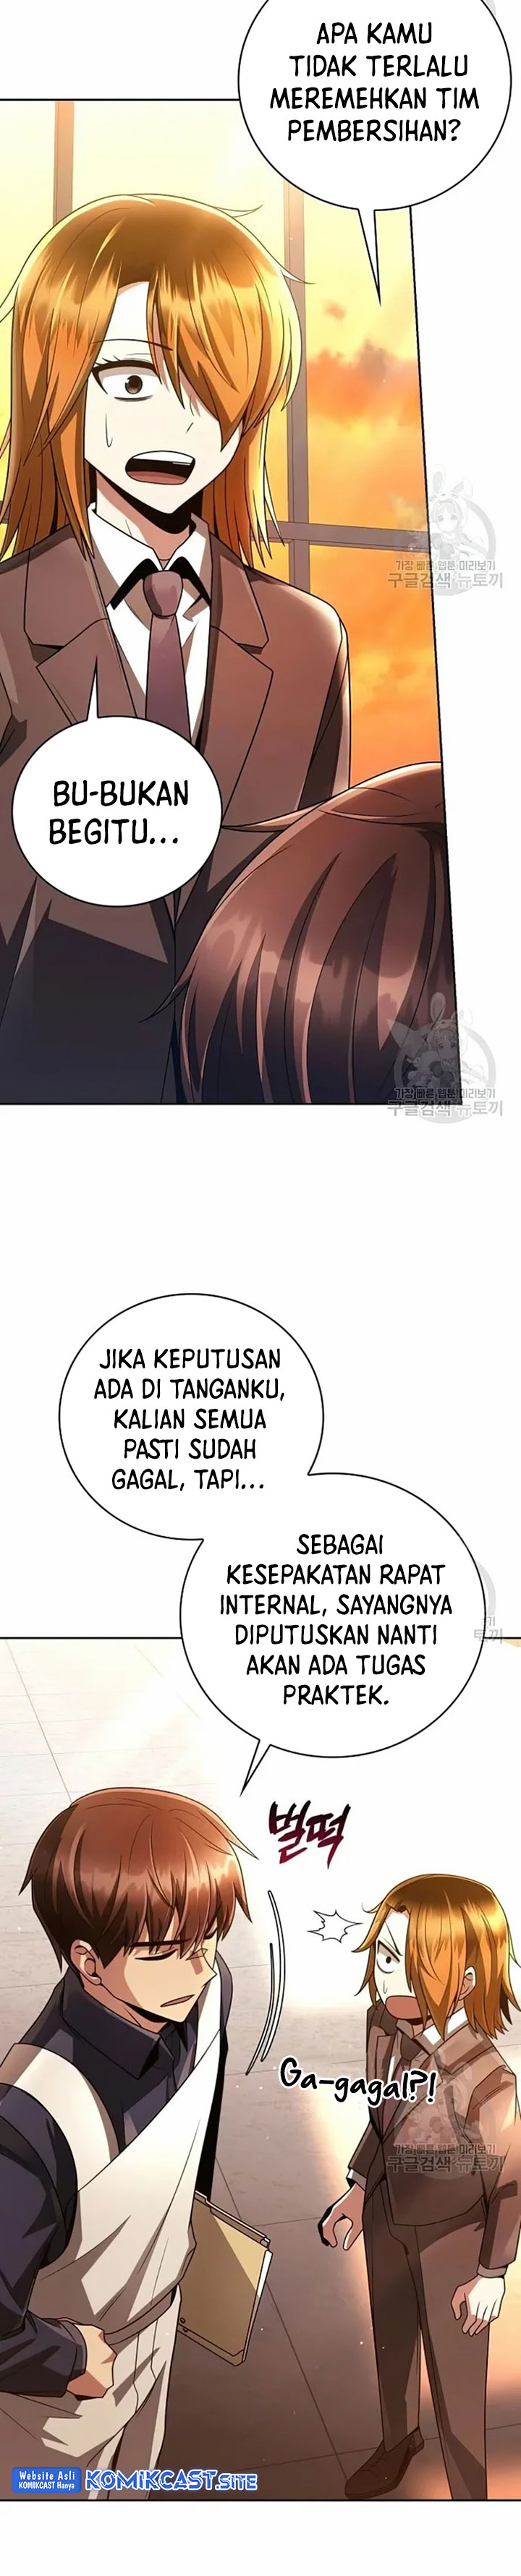 Dilarang COPAS - situs resmi www.mangacanblog.com - Komik clever cleaning life of the returned genius hunter 029 - chapter 29 30 Indonesia clever cleaning life of the returned genius hunter 029 - chapter 29 Terbaru 21|Baca Manga Komik Indonesia|Mangacan